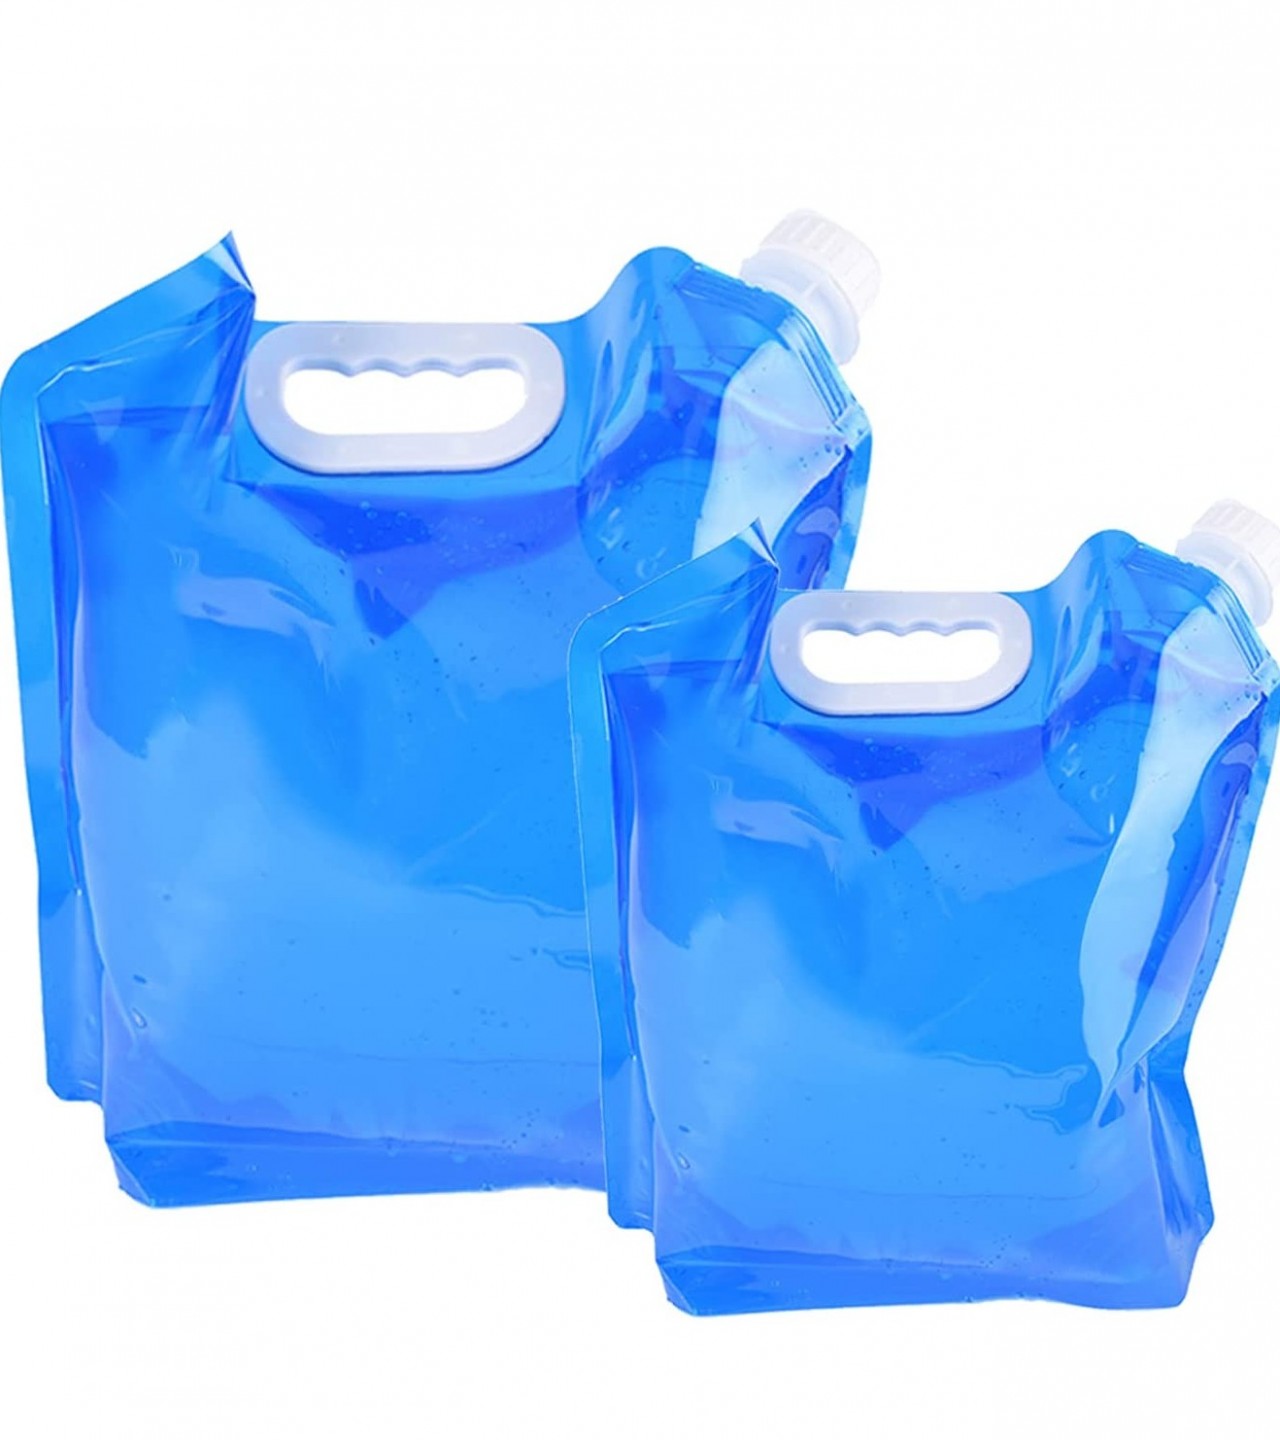 Water Container 5L Portable Foldable Water Free Plastic Water Carrier for Hiking Camping Picnic